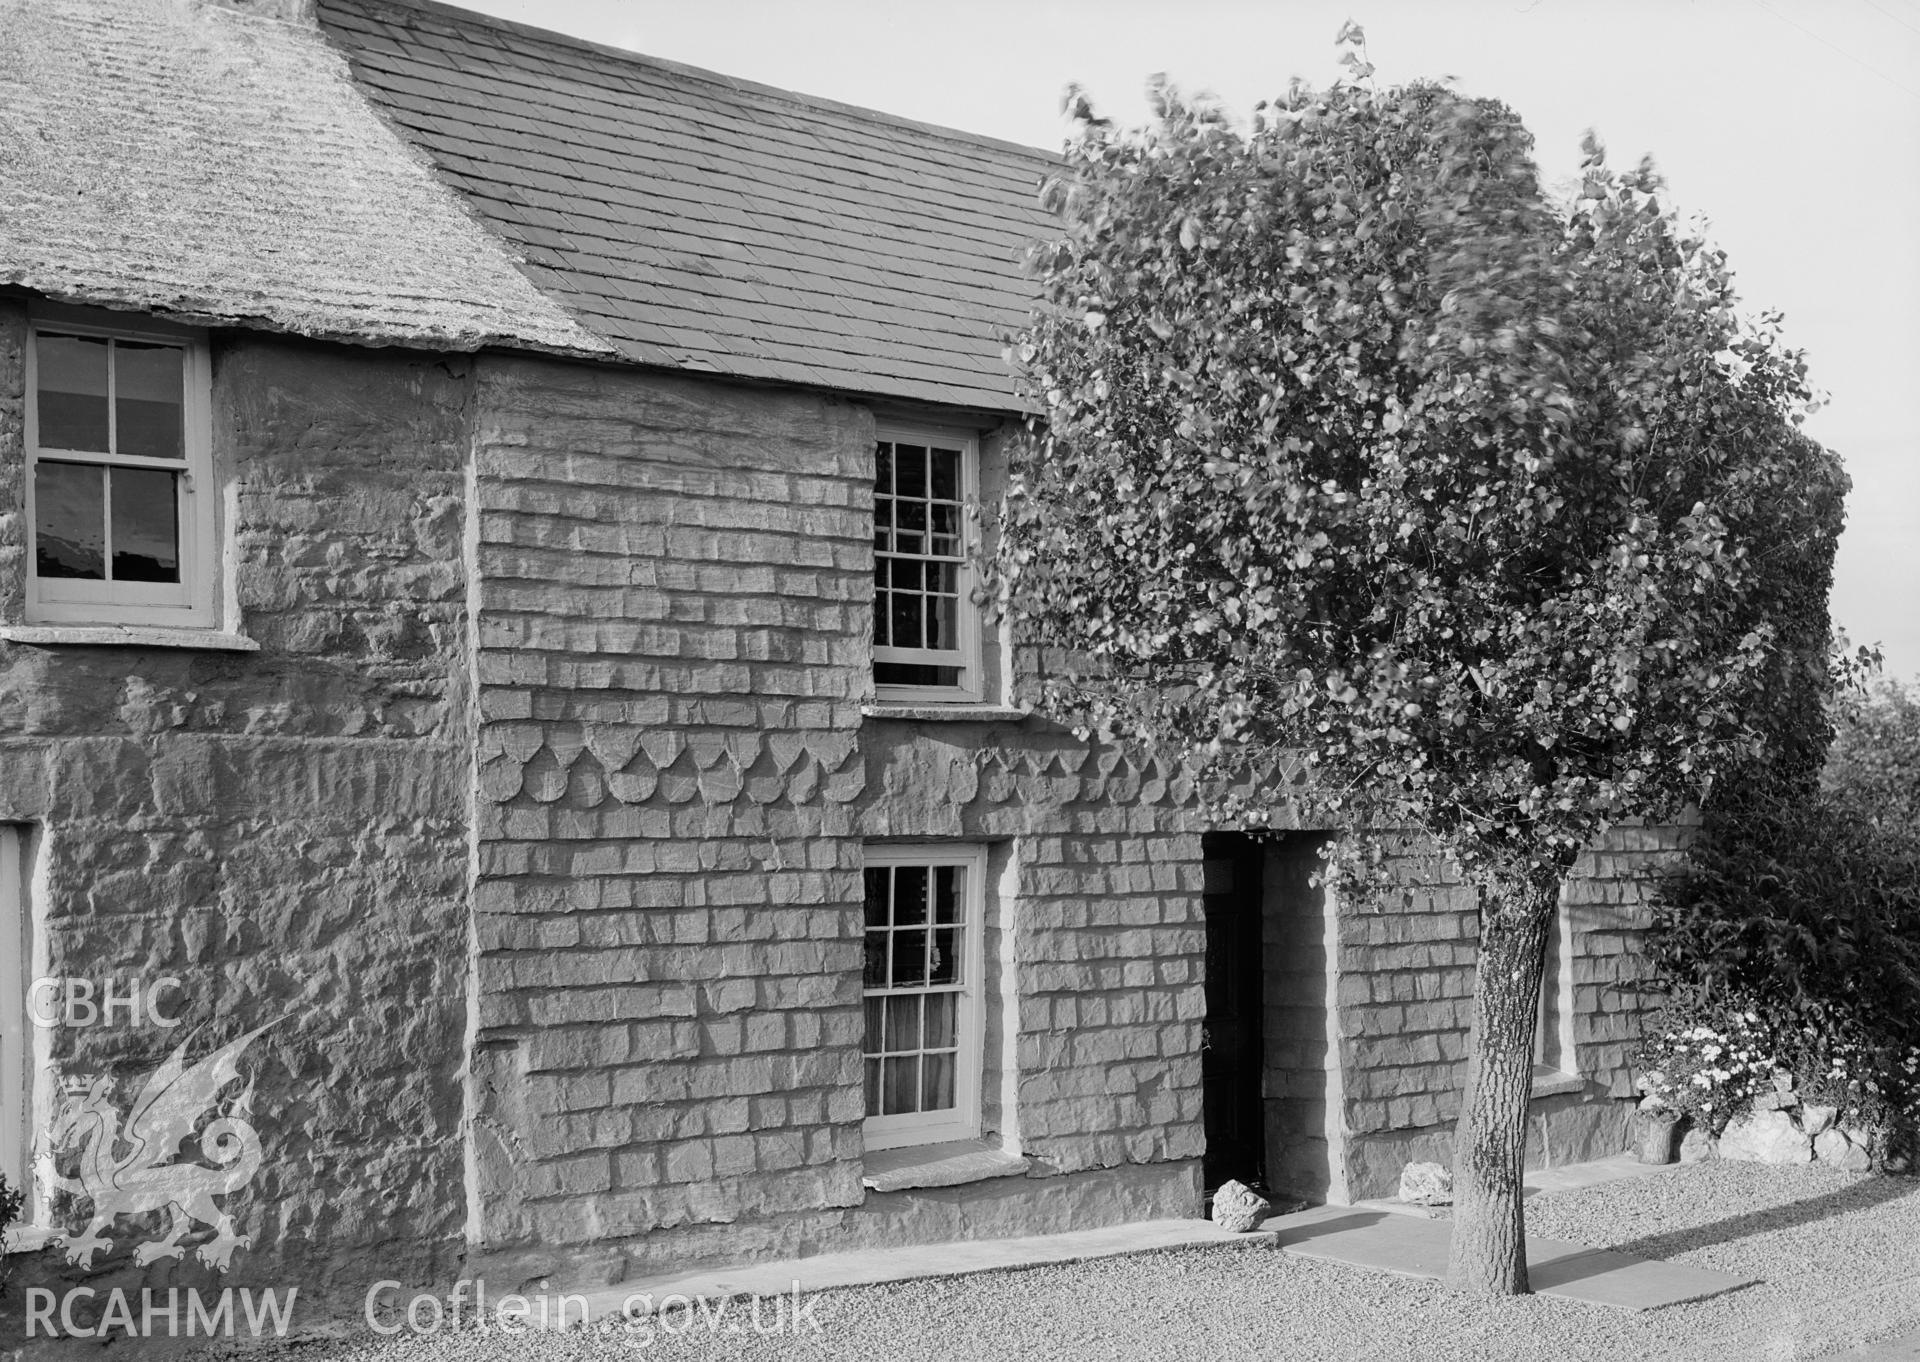 Photograph showing a slate-hung house in Dinas.